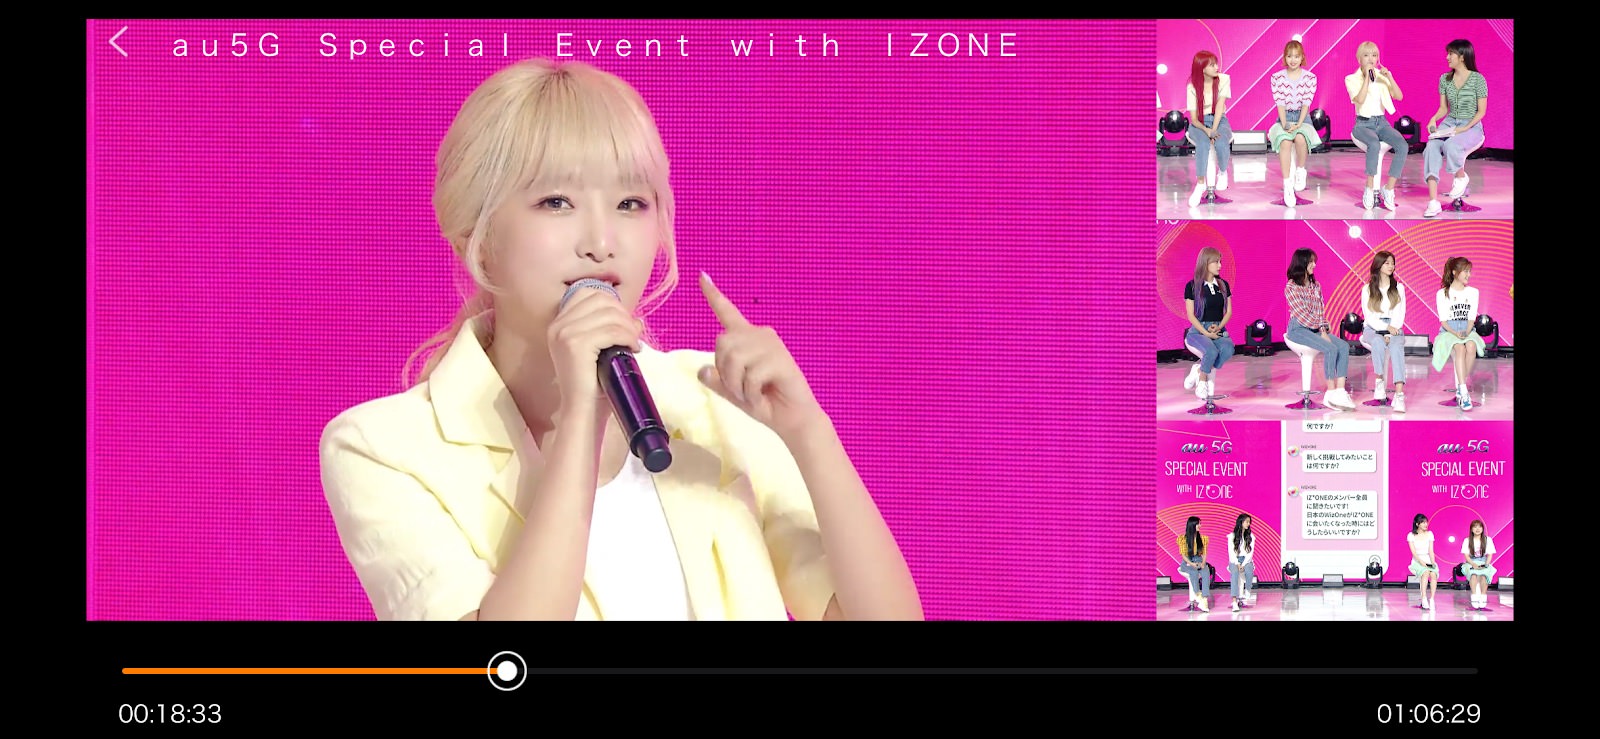 「au 5G Special Event with IZ*ONE」スペシャルトークショーの様子